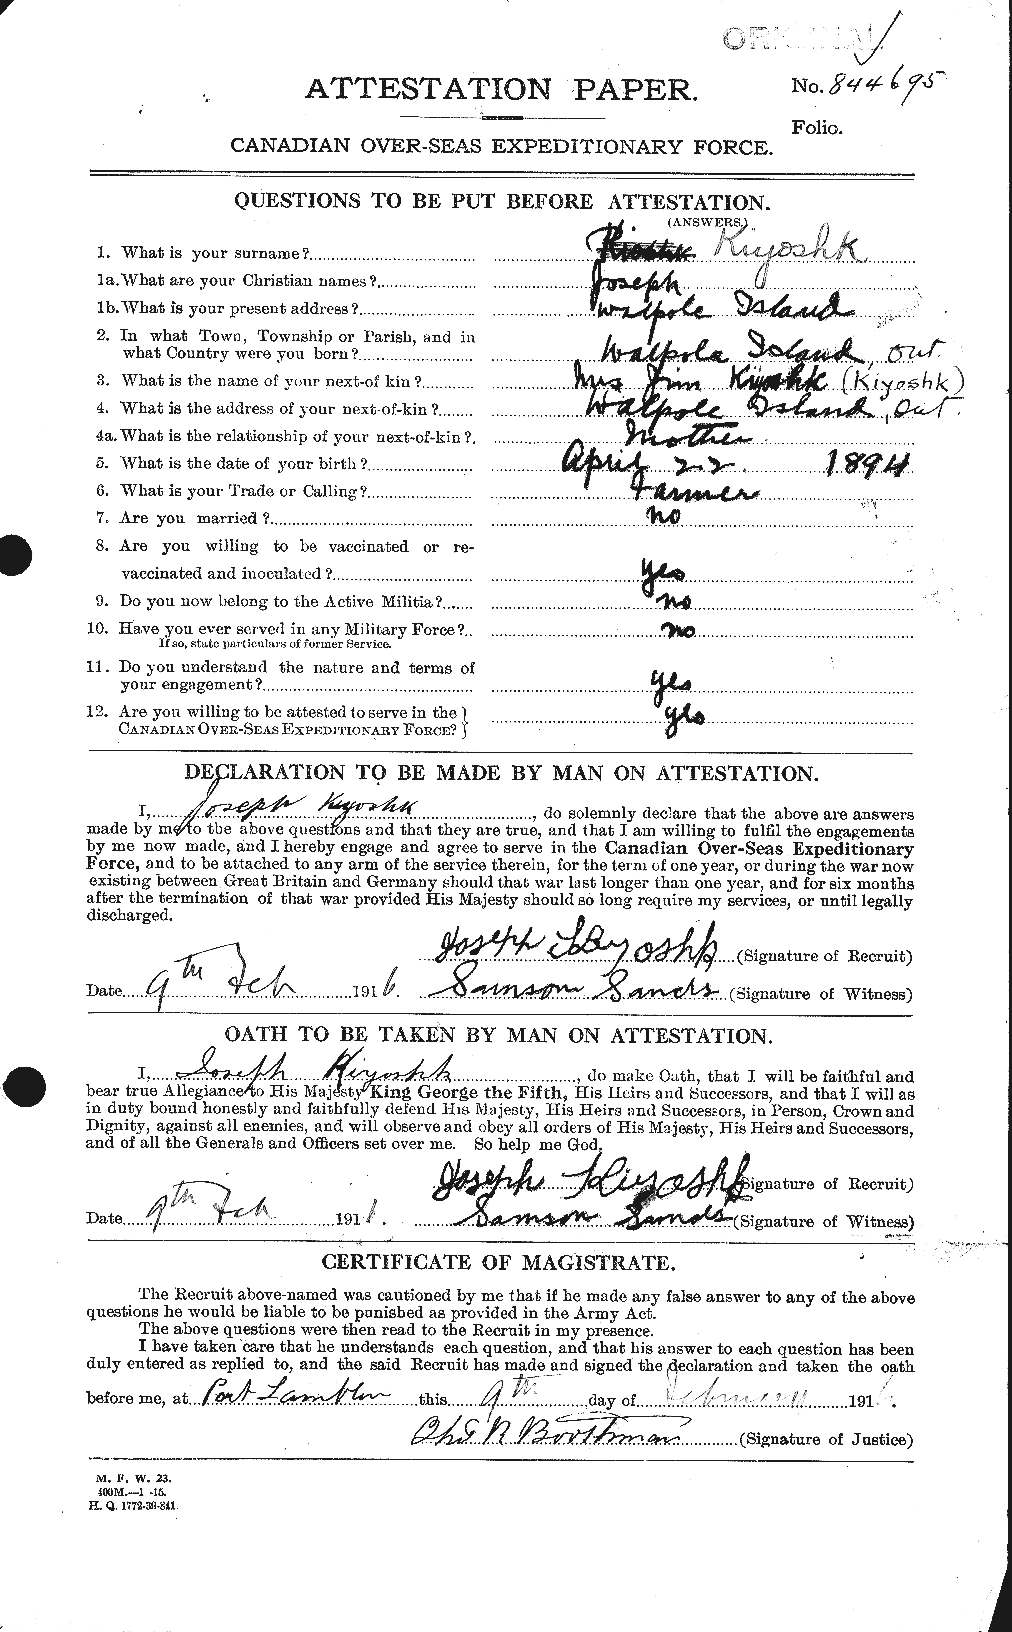 Personnel Records of the First World War - CEF 438695a